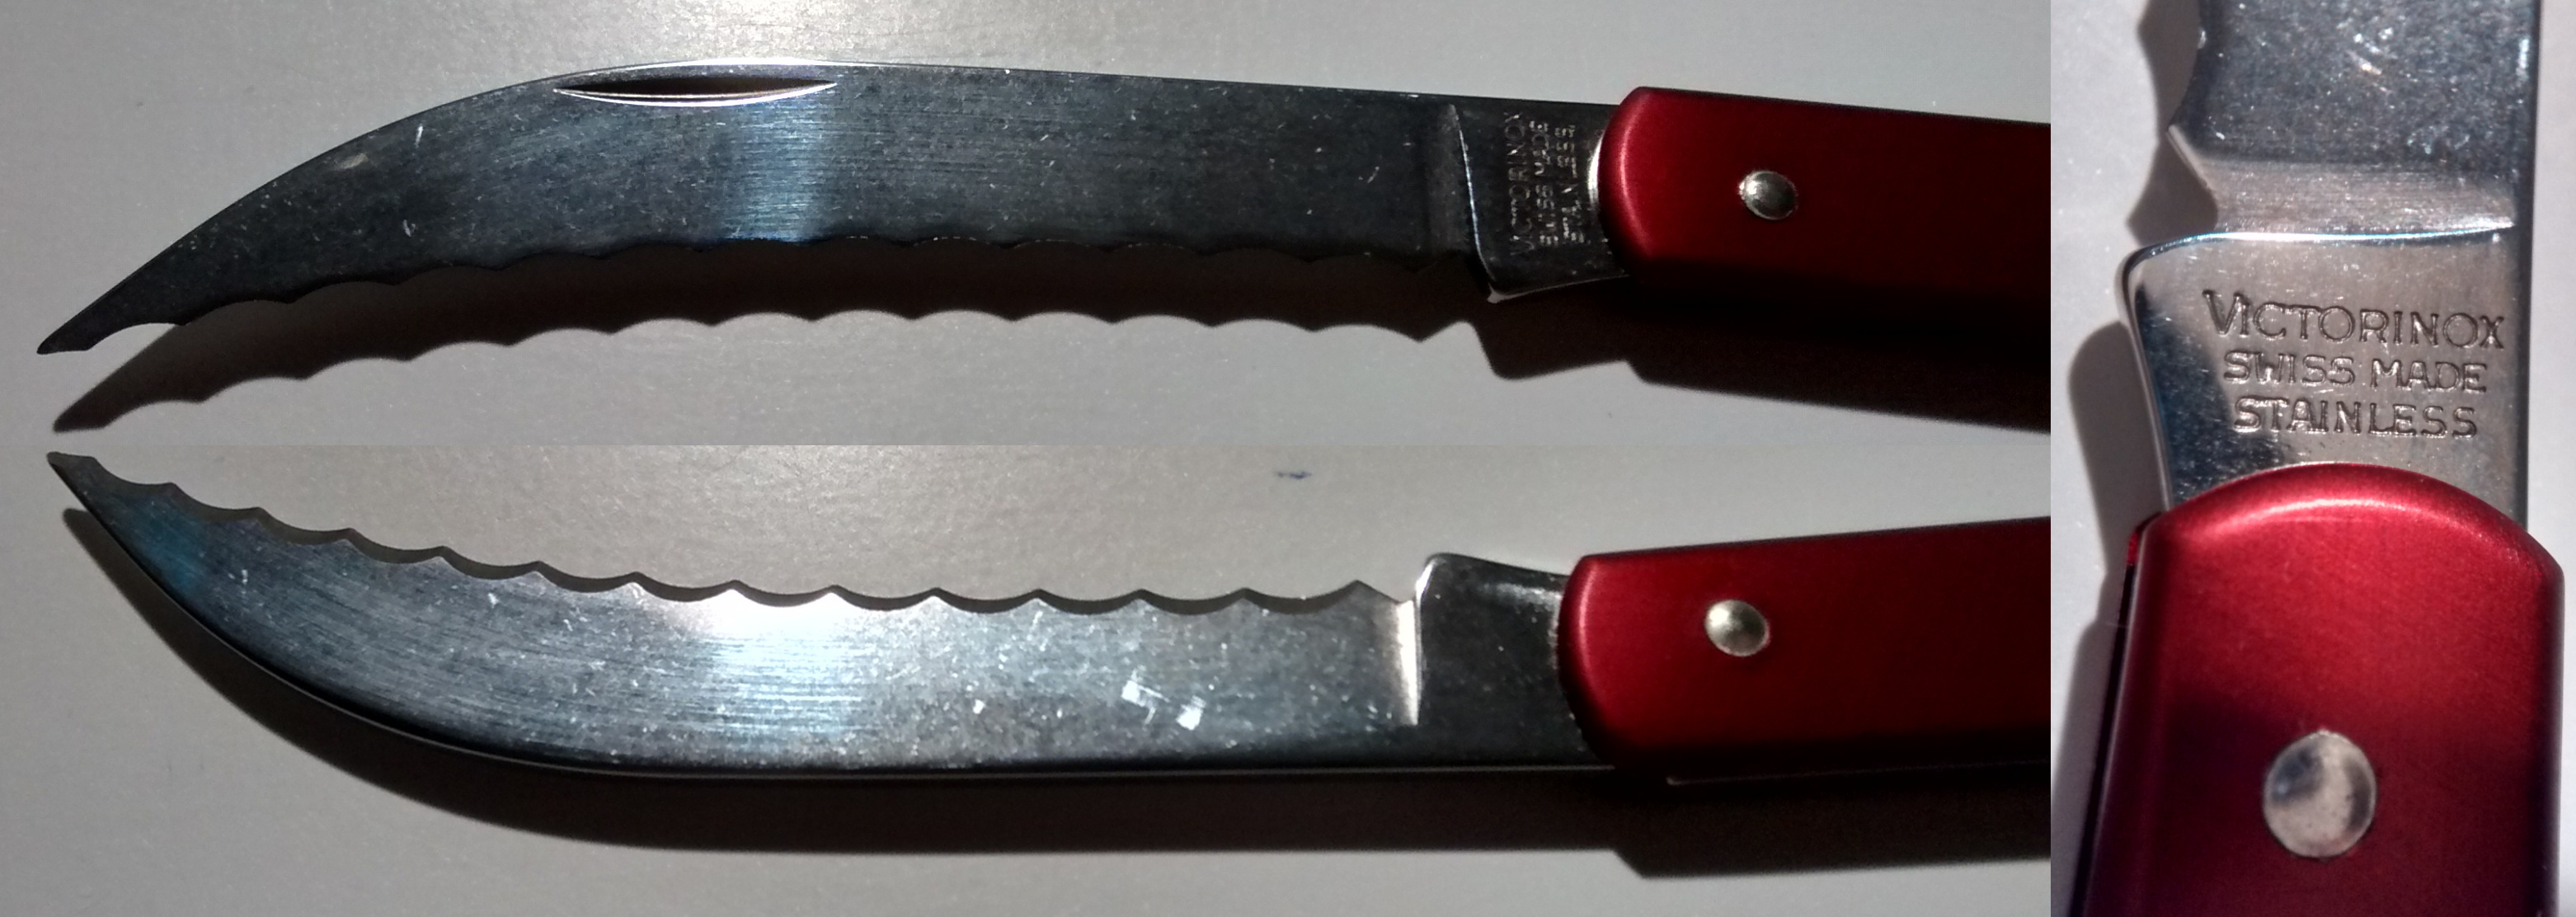 Close Up picture of the bakers knife serrated blade